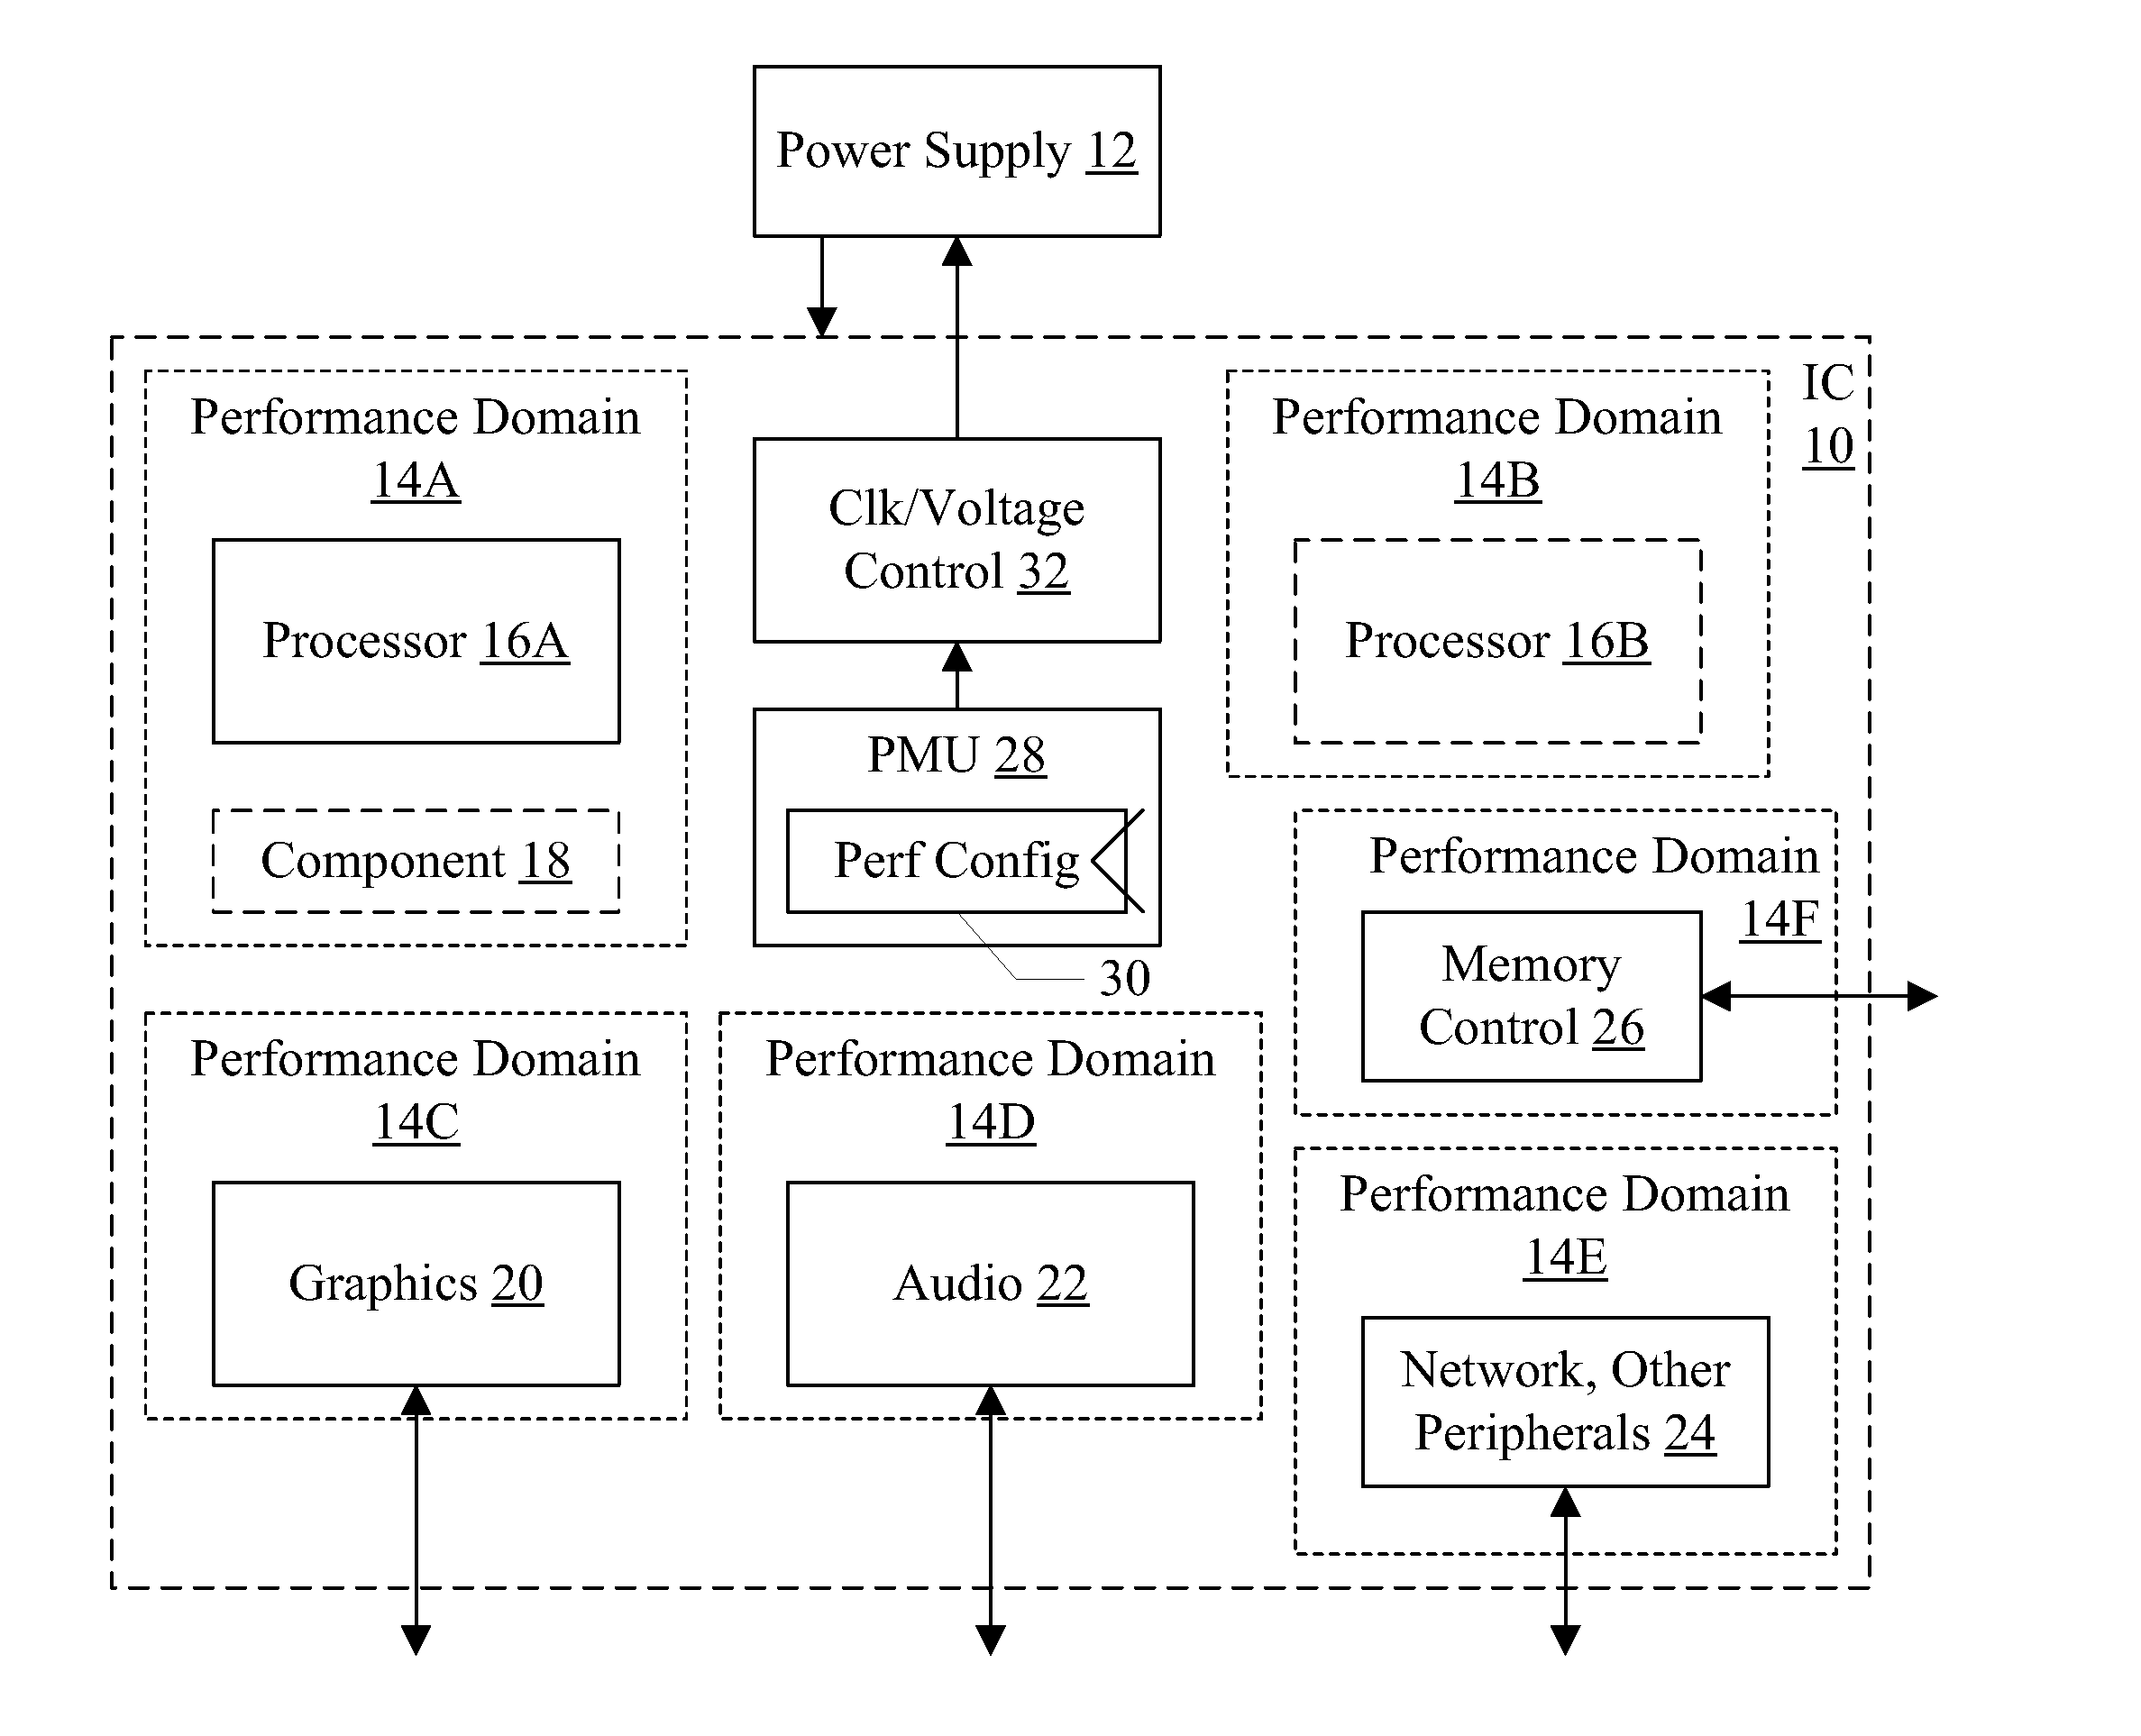 Hardware automatic performance state transitions in system on processor sleep and wake events